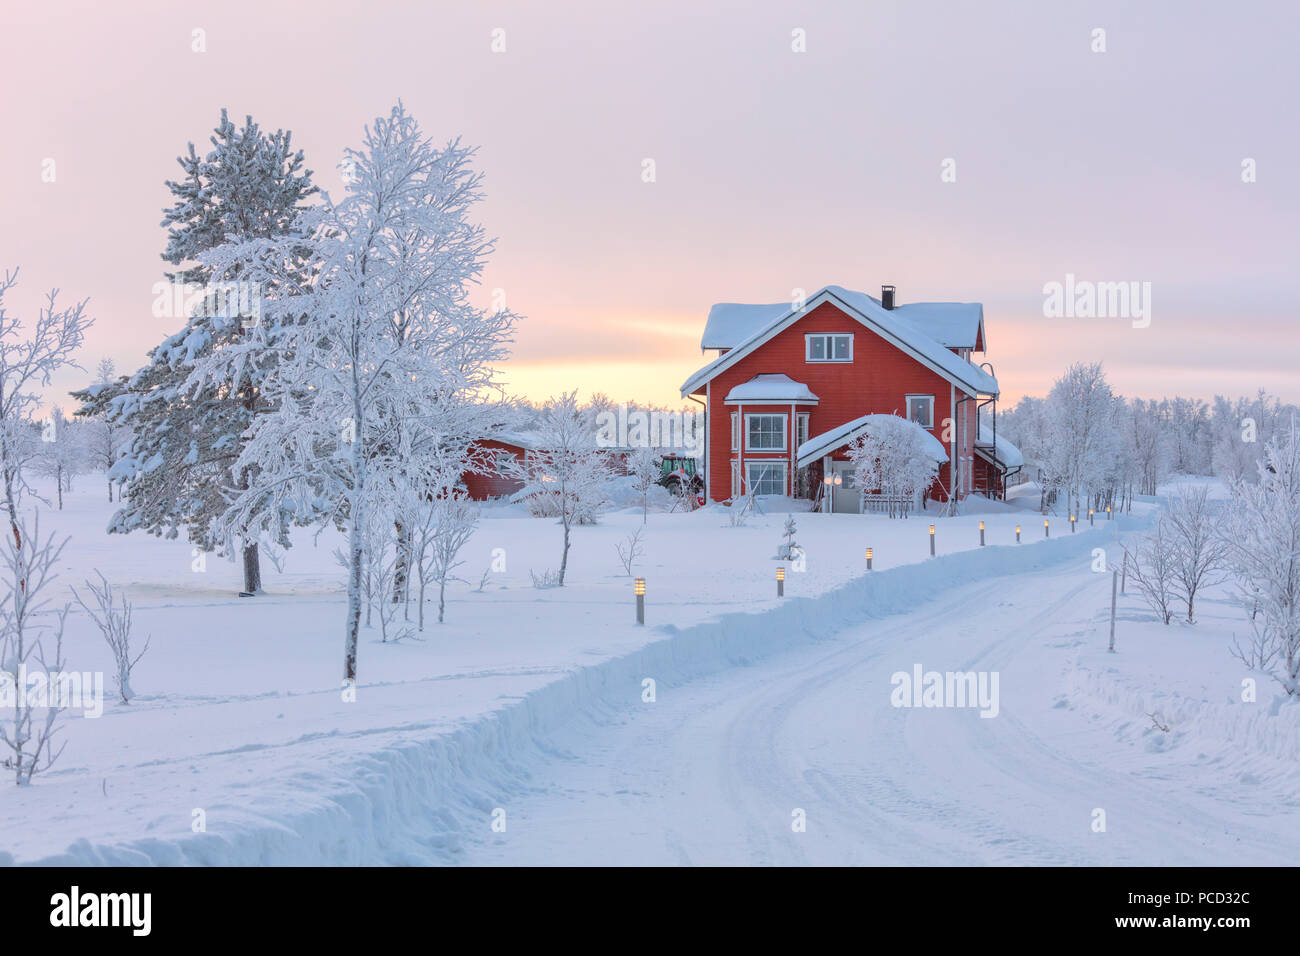 Typical house in the snowy forest, Muonio, Lapland, Finland, Europe Stock Photo